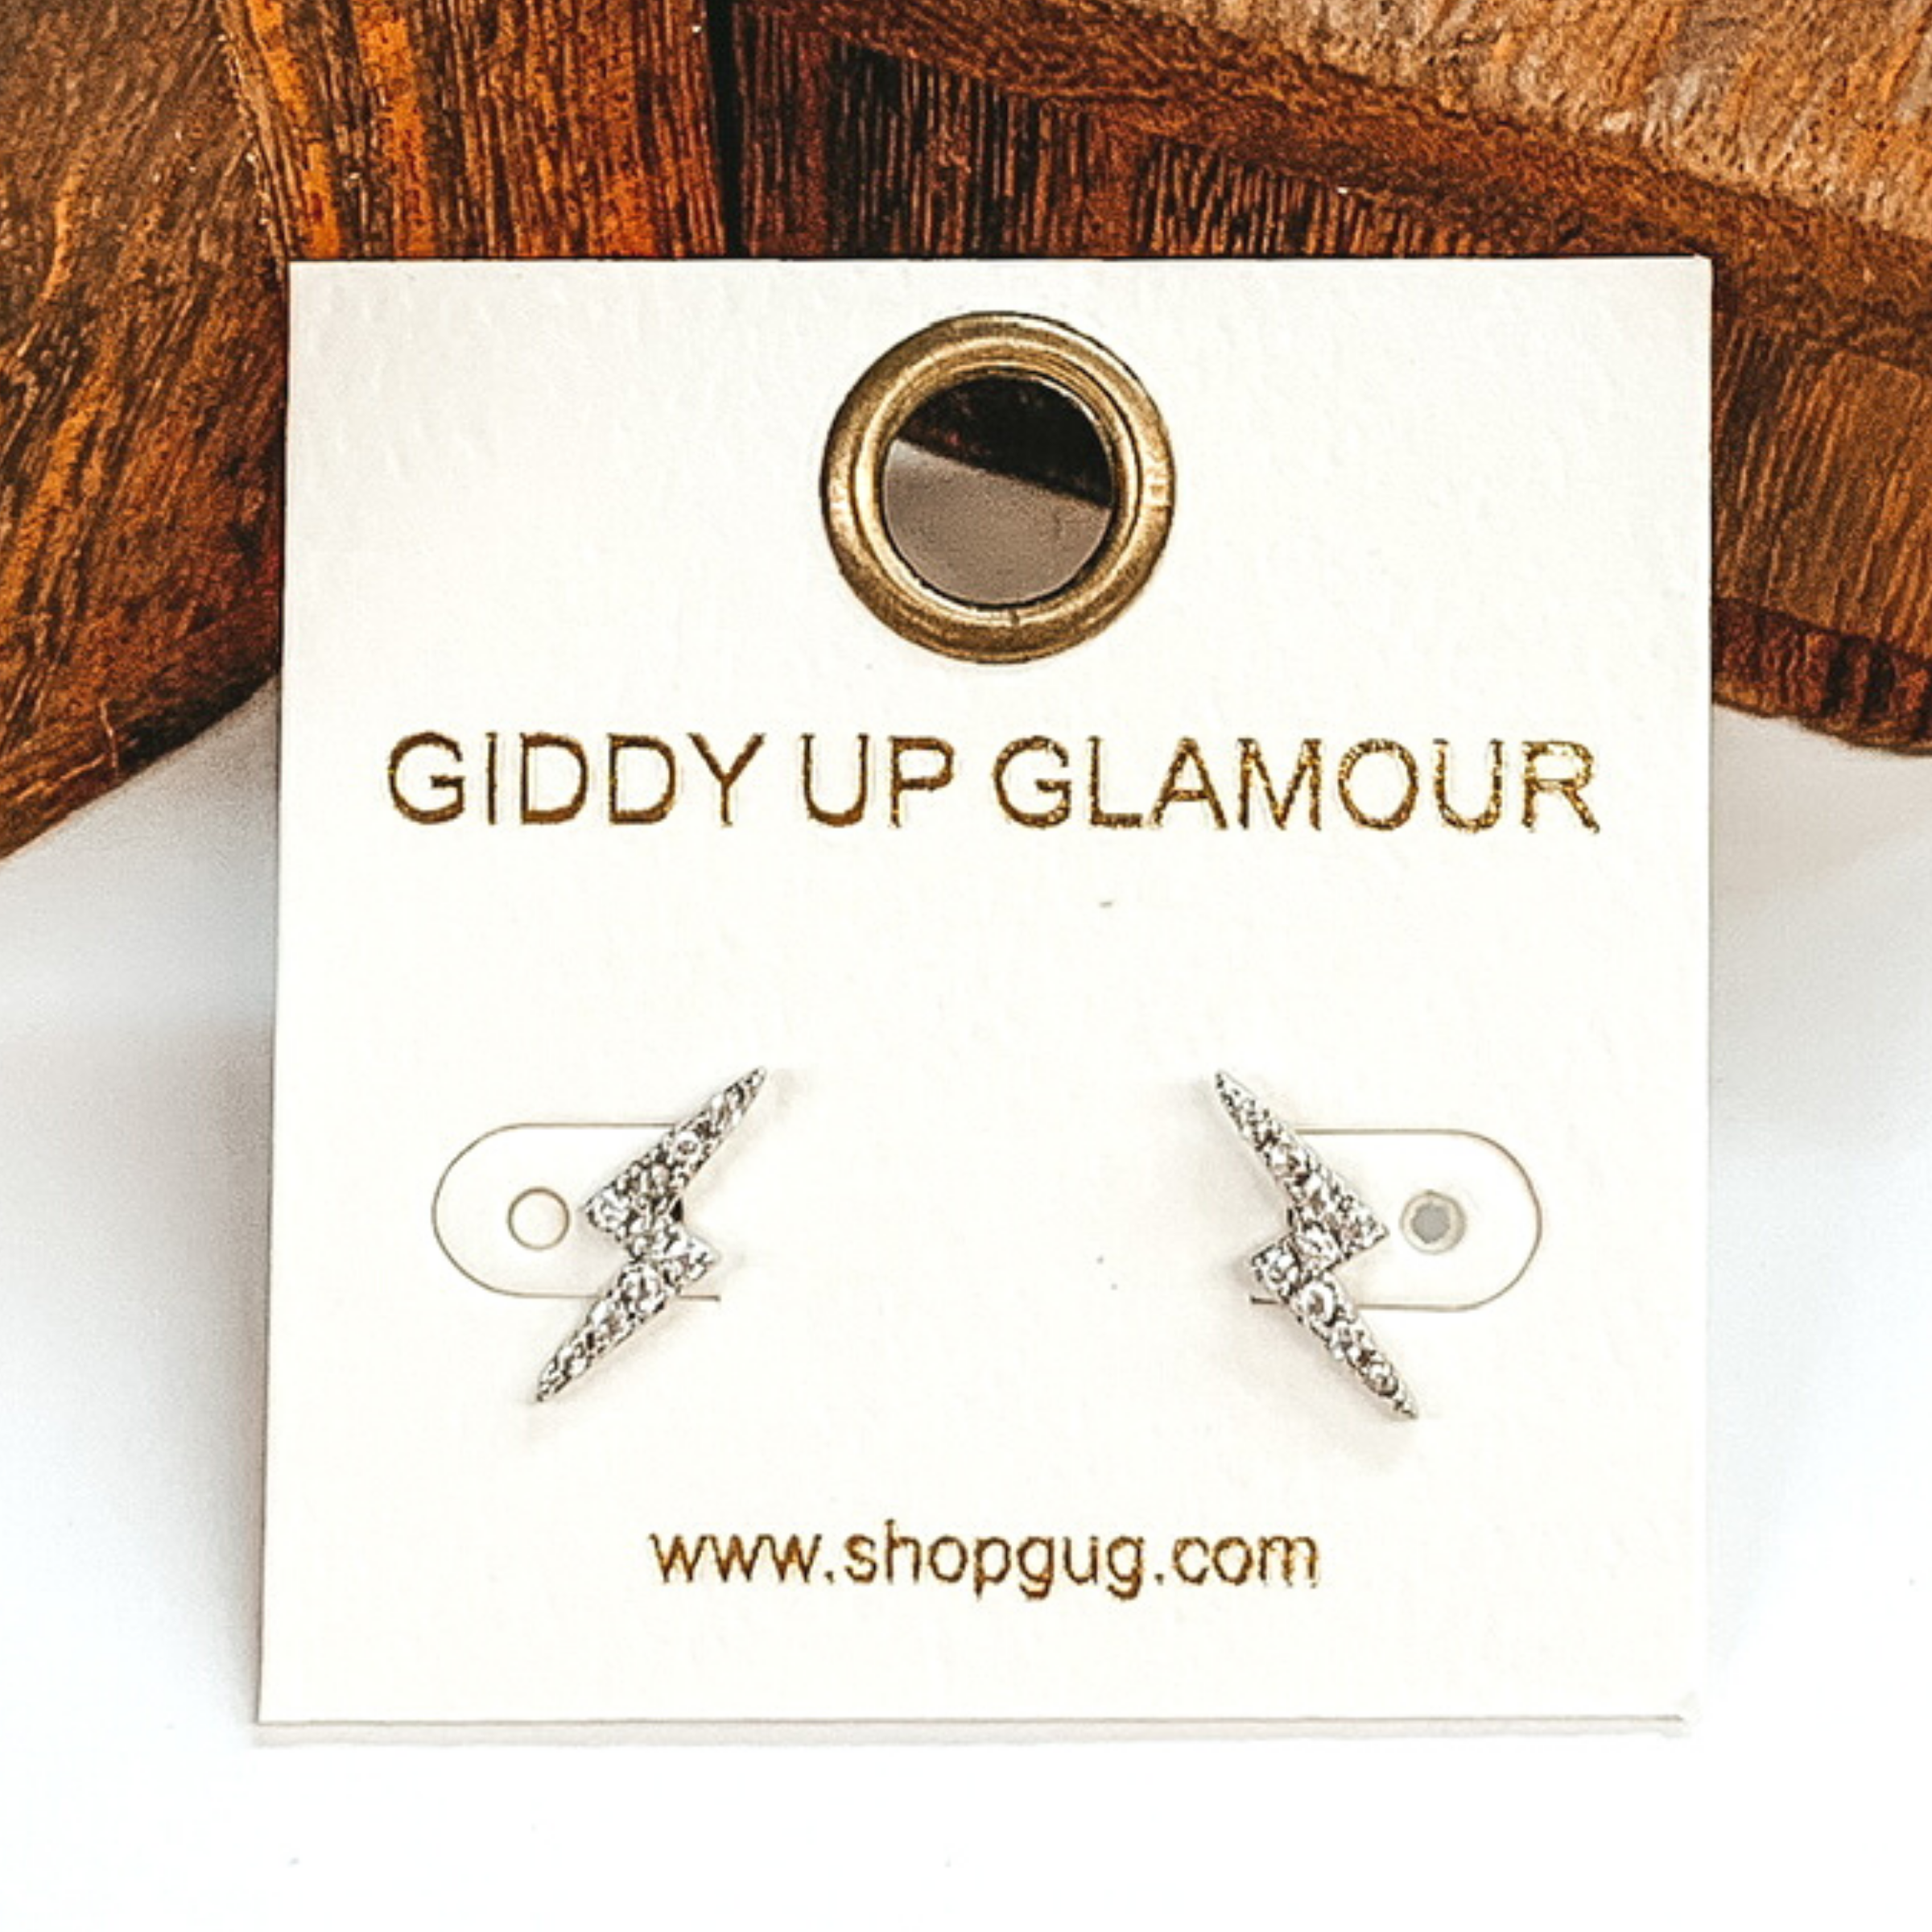 Small, silver thunder bolt stud earrings with clear crystals. These earrings are pictured on a white earrings card on a white and brown background.